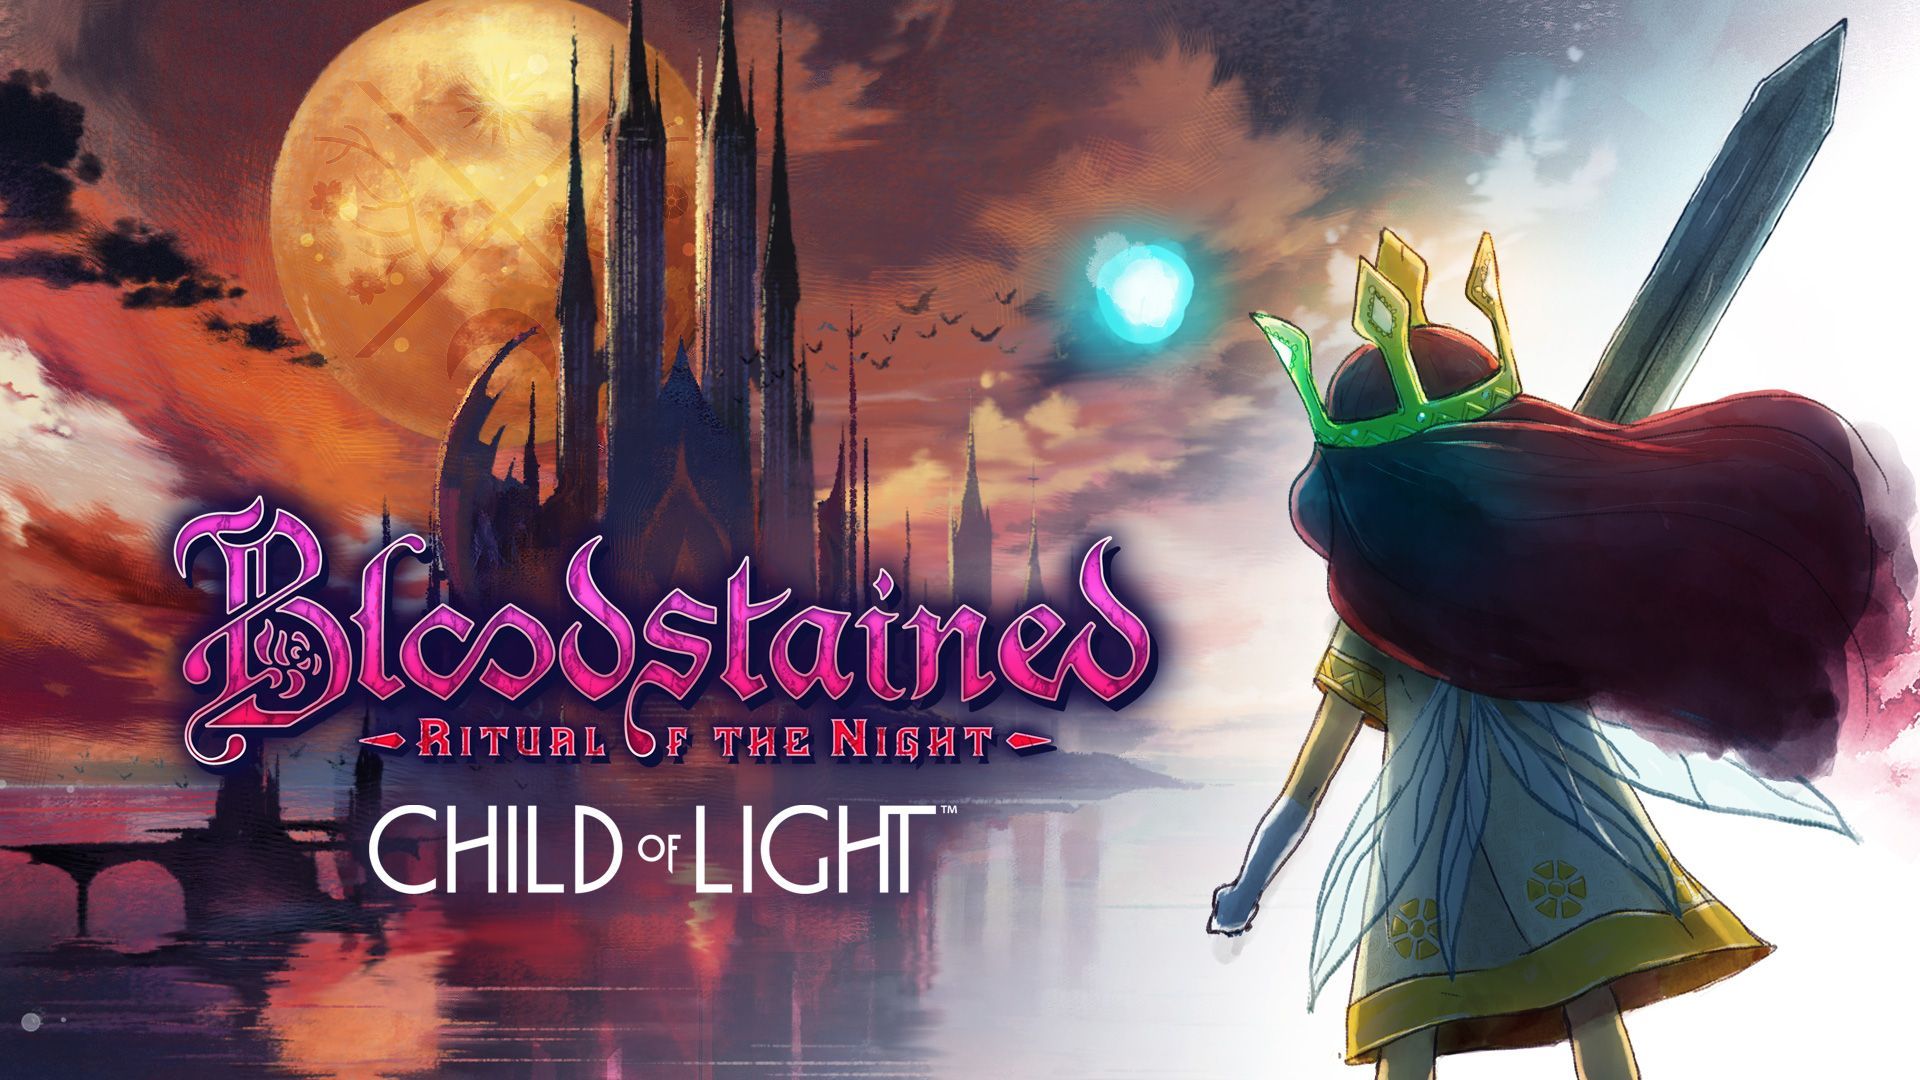 #Bloodstained: Ritual of the Night bekommt unverhofften Besuch aus Child of Light